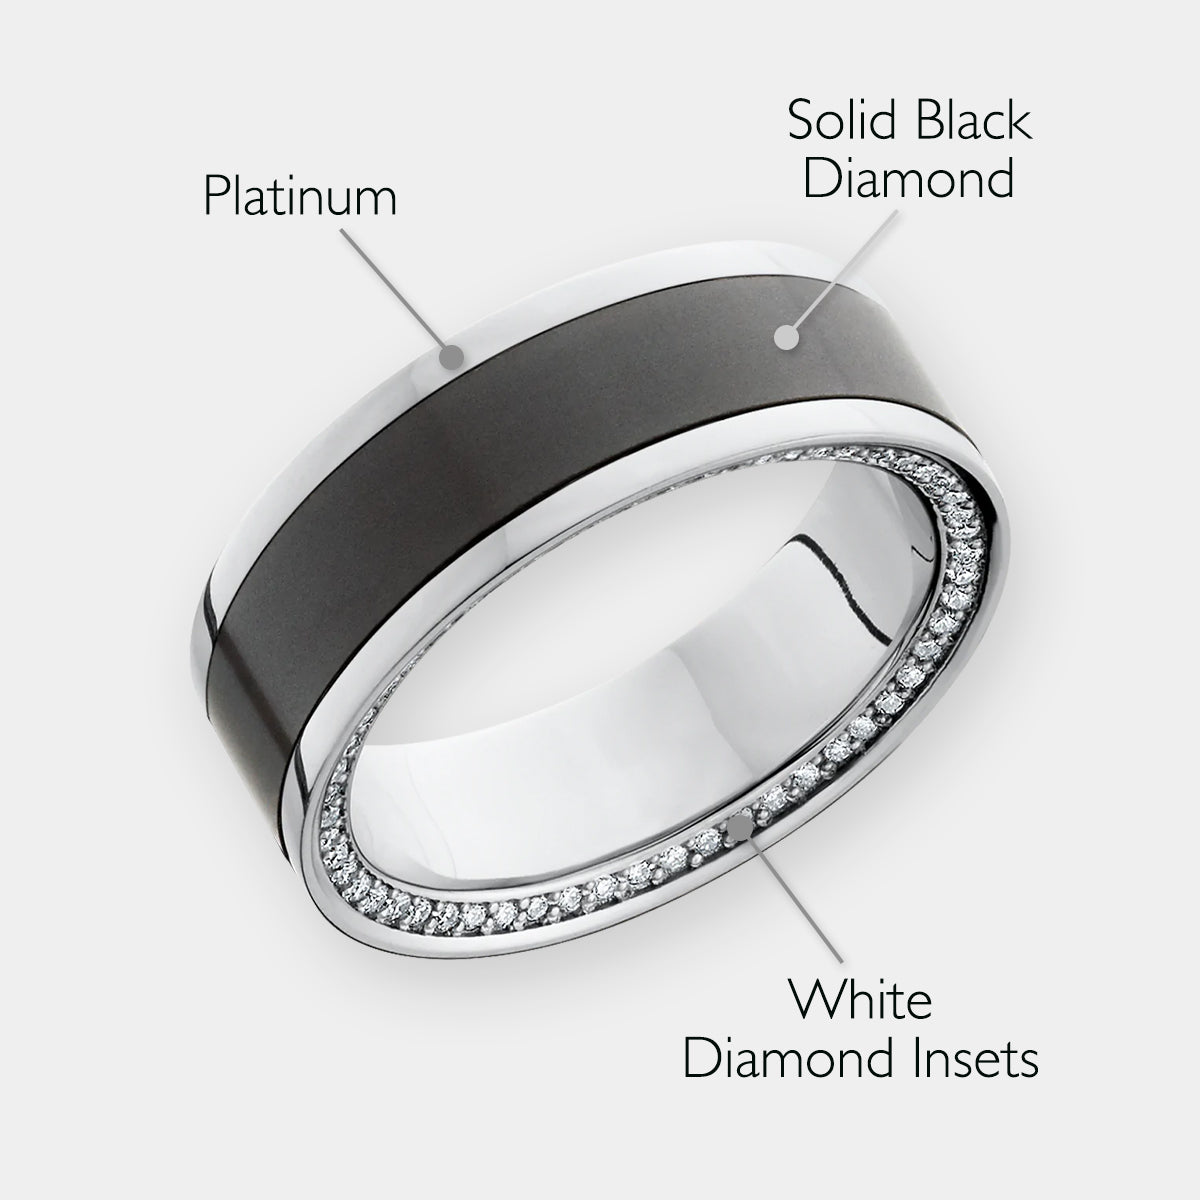 Solid Black Diamond Inlay Ring with a Platinum Band & White Diamonds Inset on a Reverse Bevel with material descriptions listed | Men's Black & White Diamond Wedding Rings